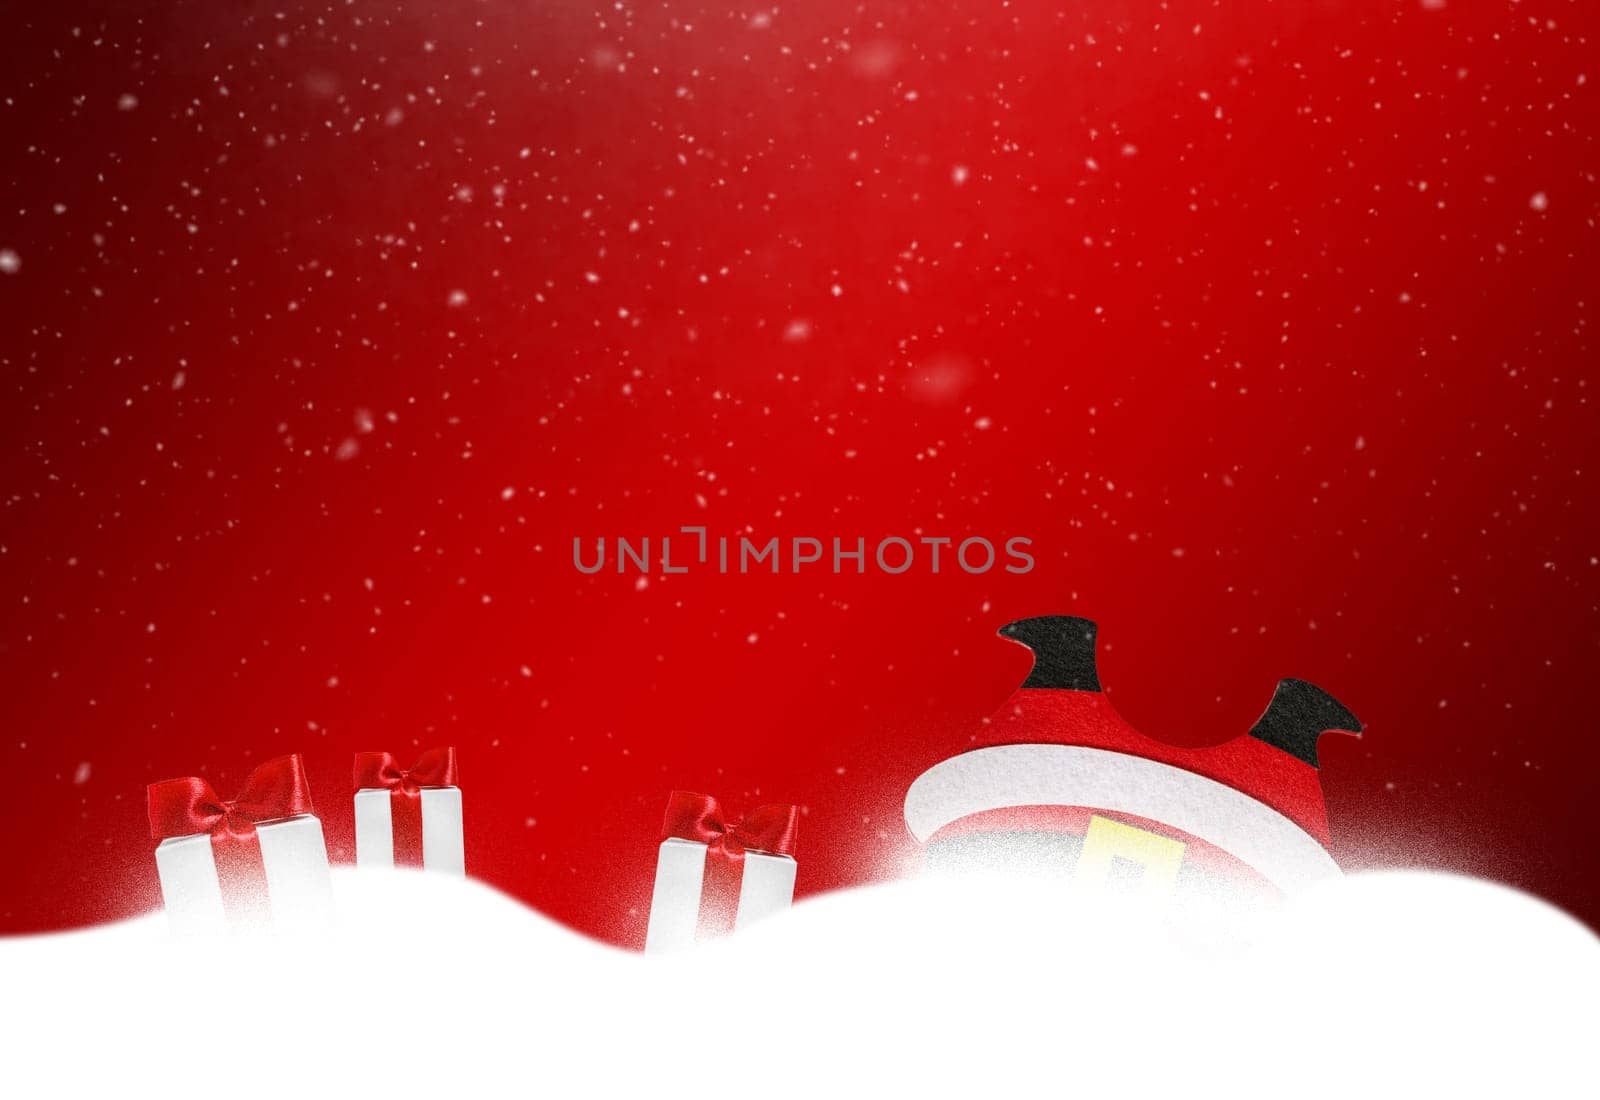 Cute Santa Claus falls into the snowdrift. Gift boxes in all directions. Christmas, New Year illustration. Collection of Santa in cartoon style. Red background and copy space.